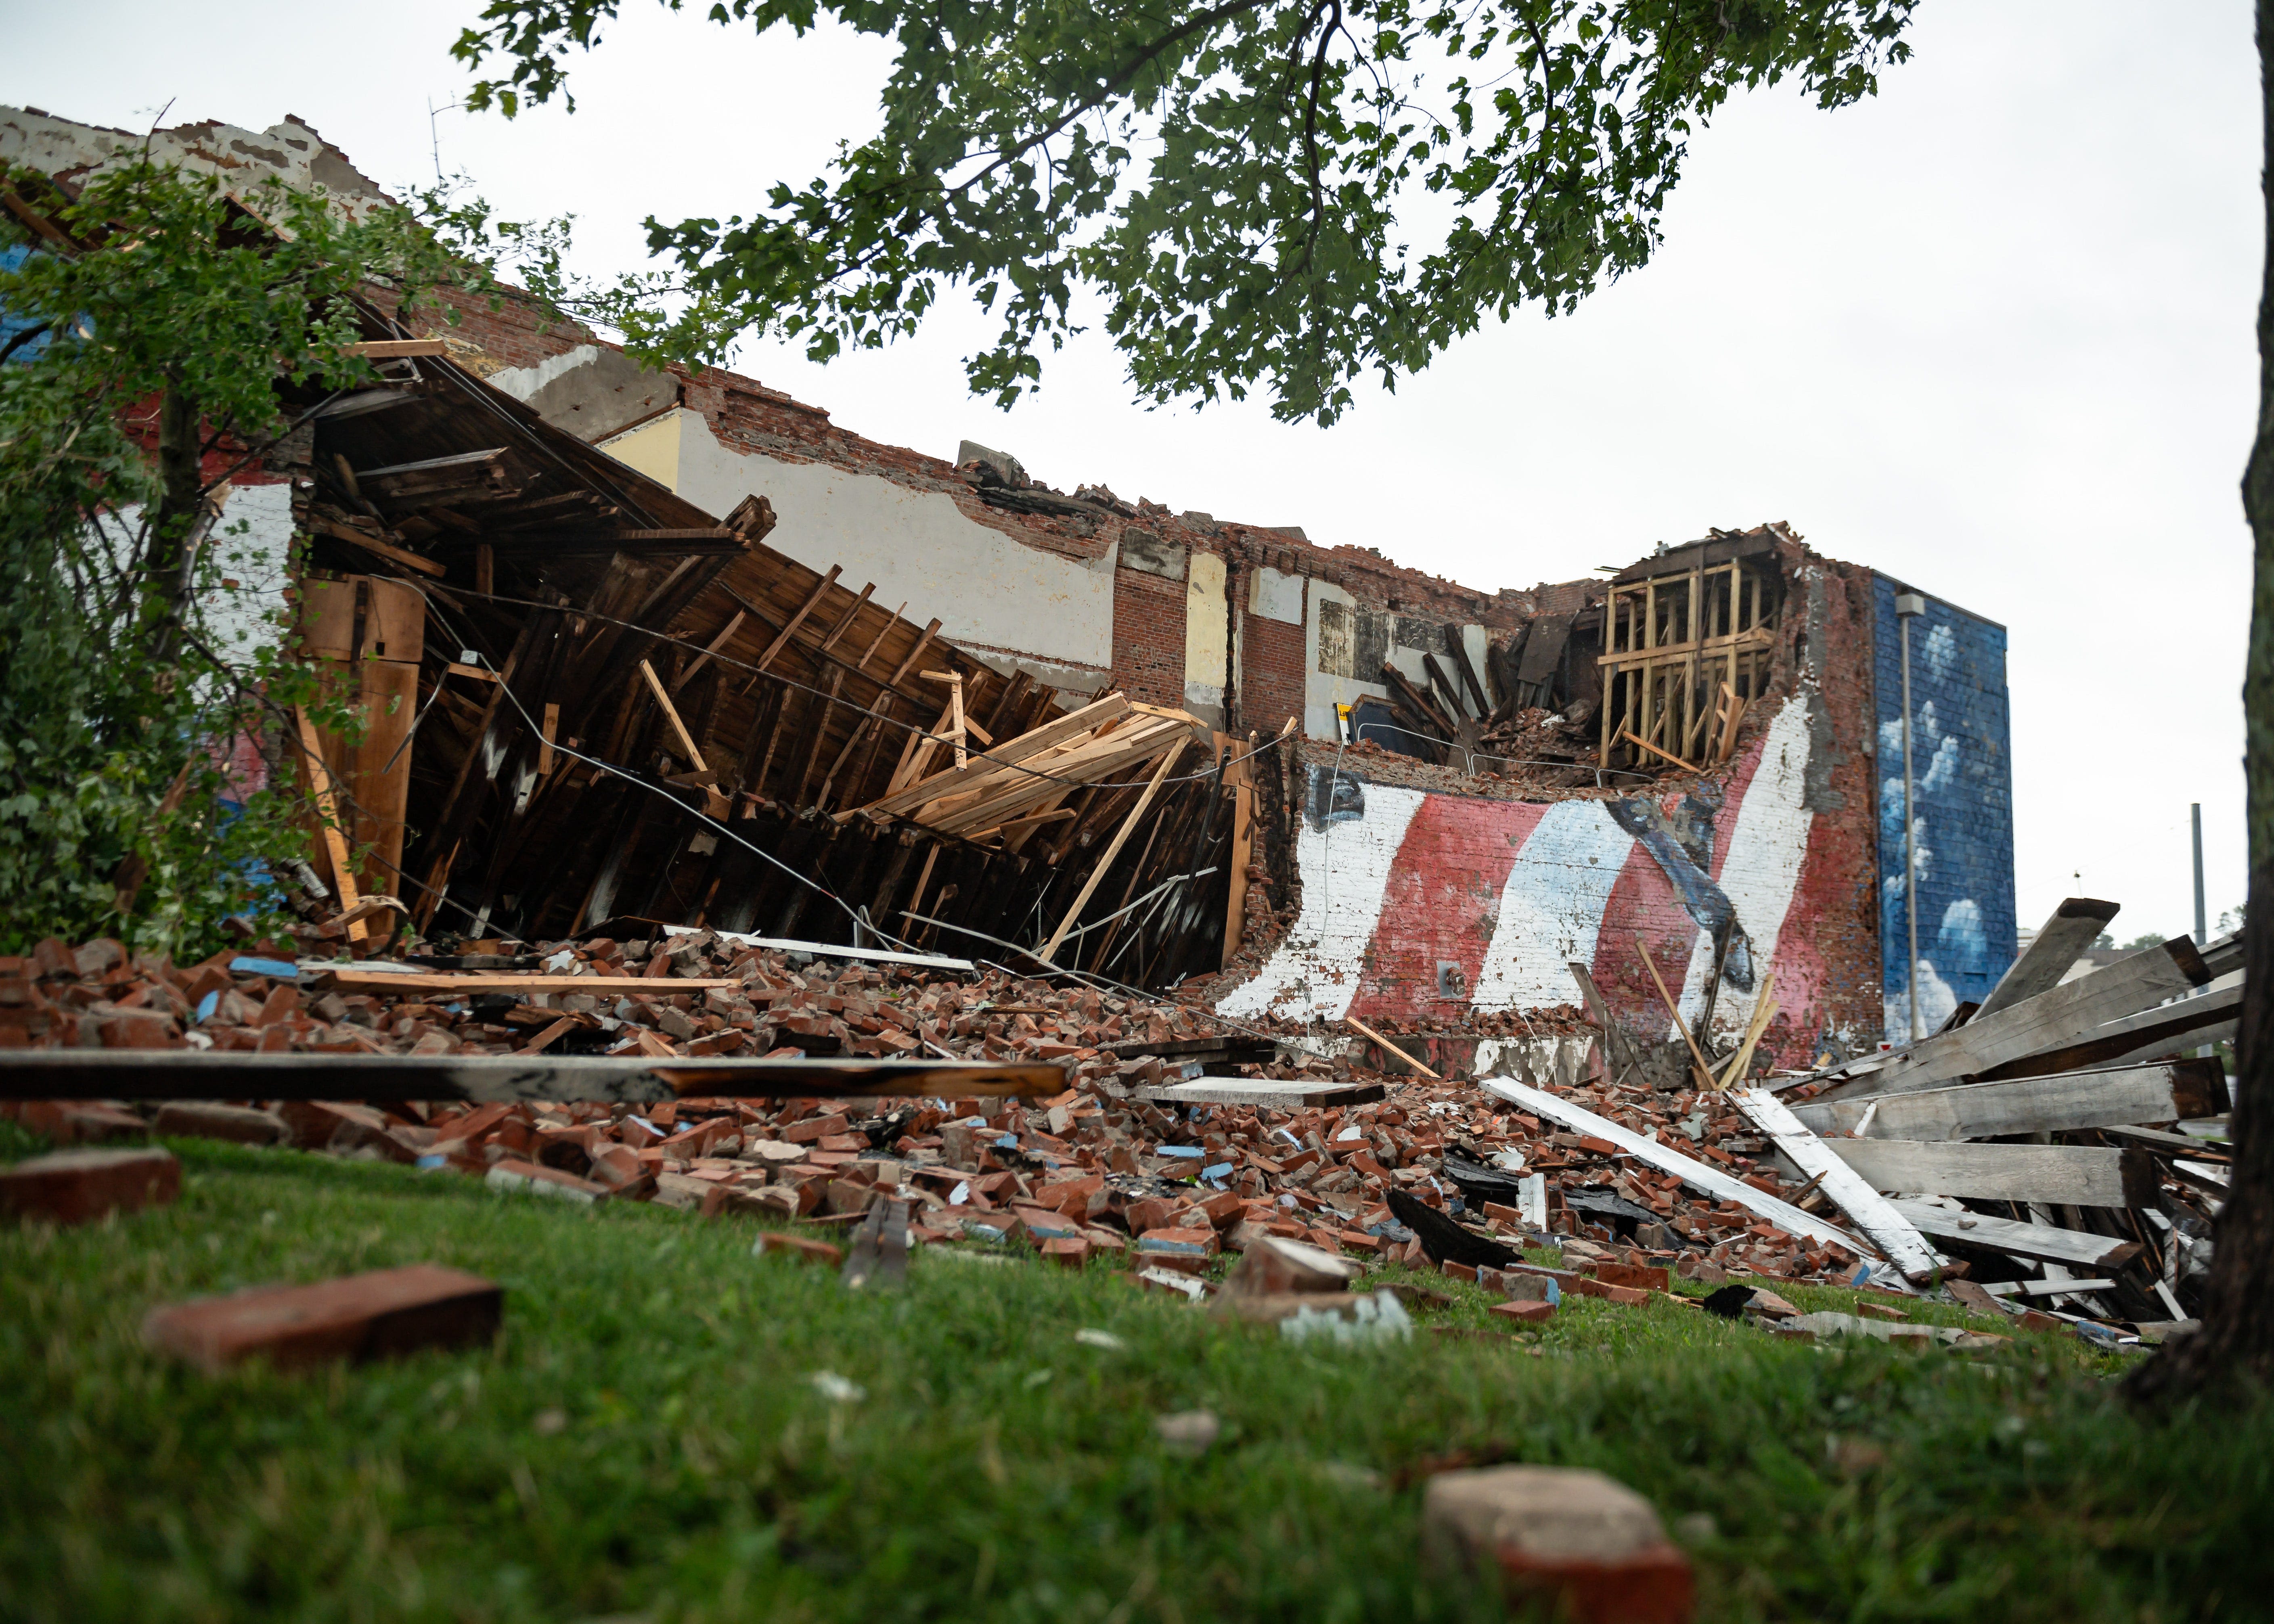 Tornado, storms ravage Rome and Canandaigua in upstate NY. The latest